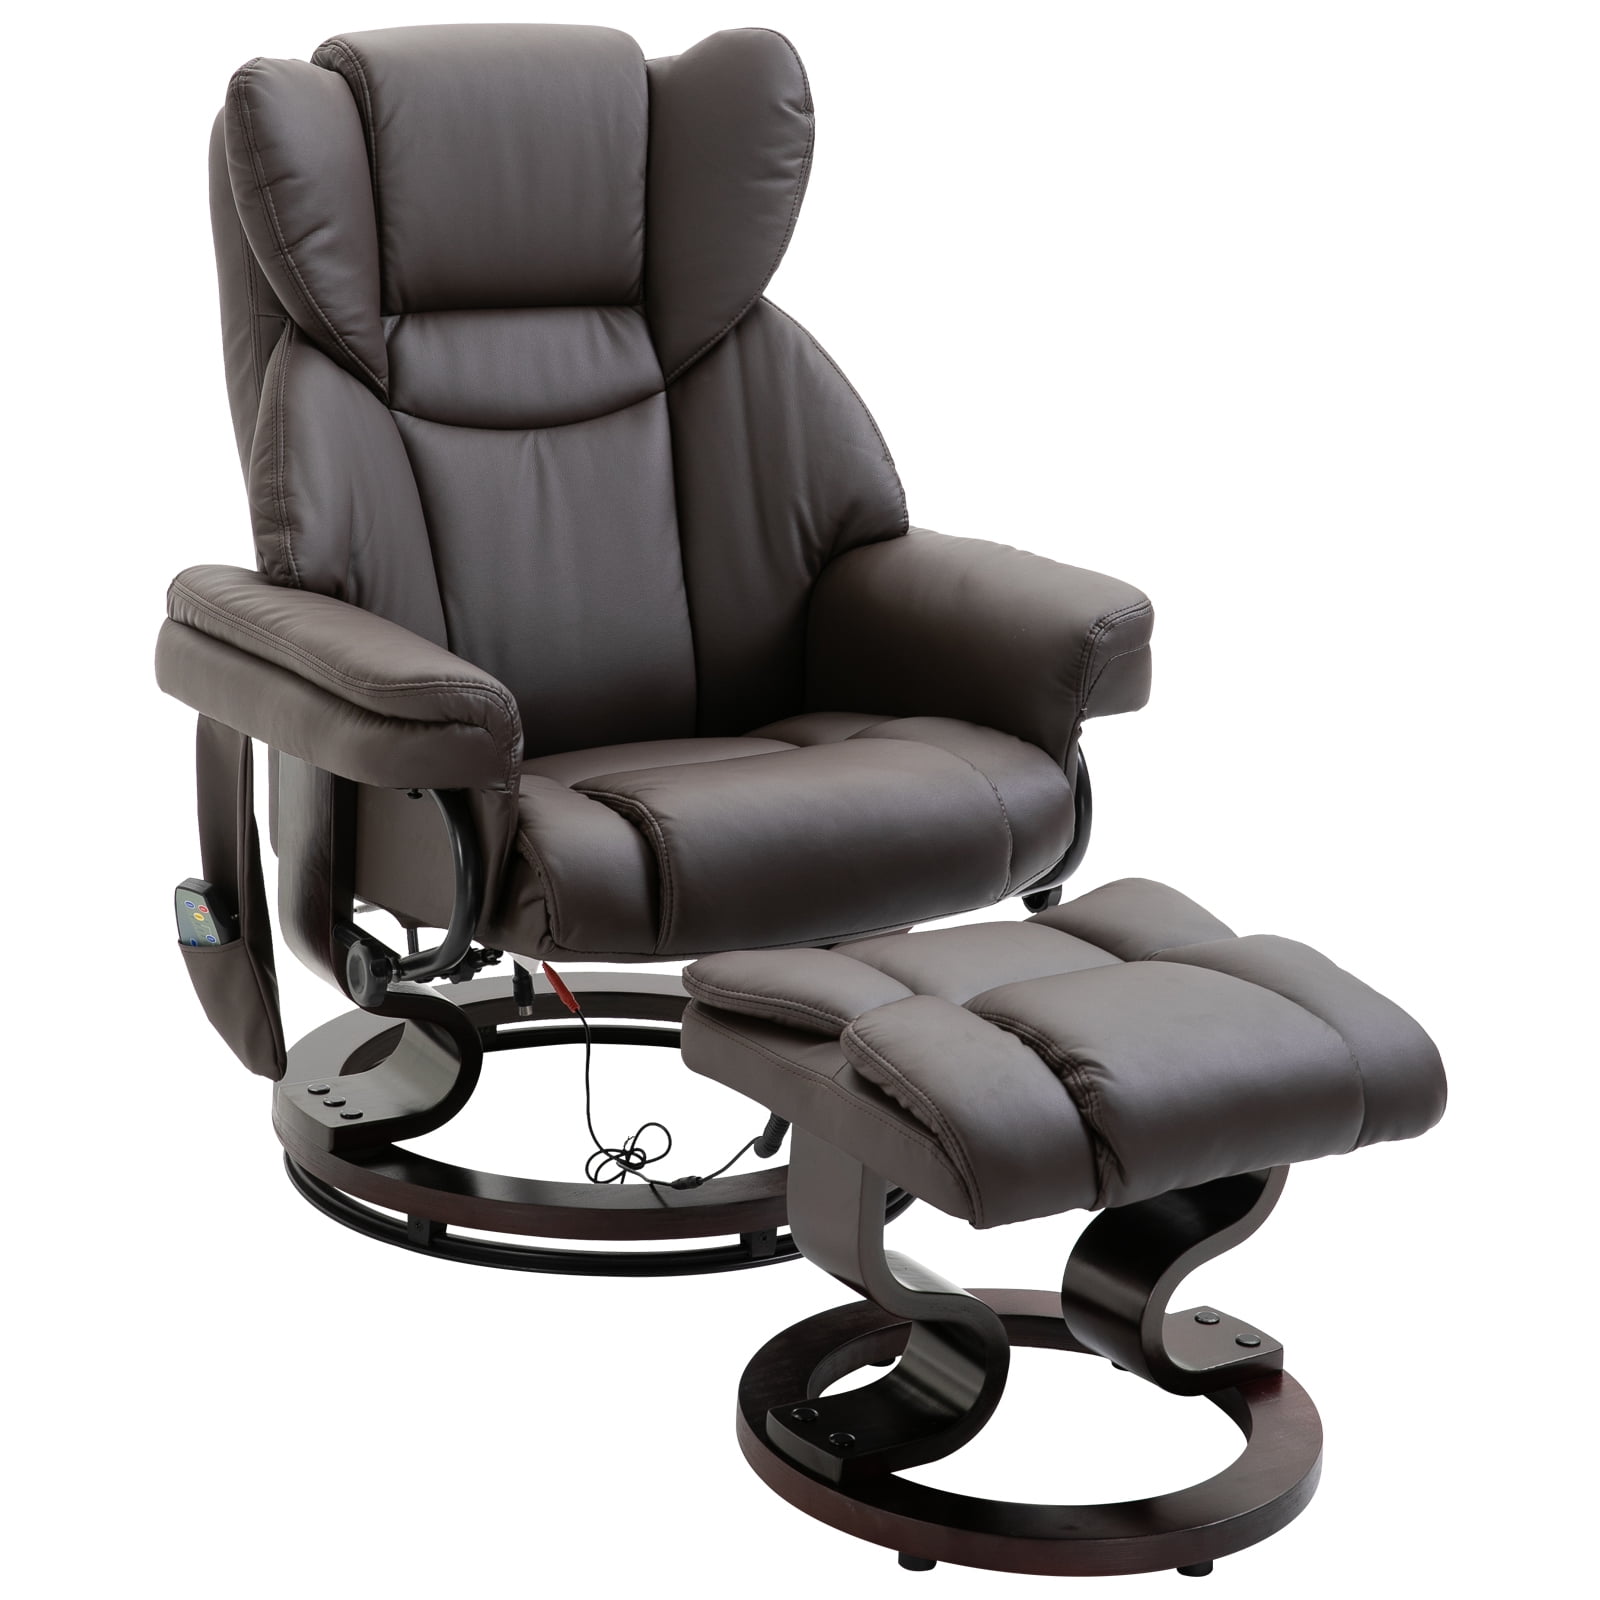 Homcom Massage Recliner Chair With, Black Leather Massage Chair